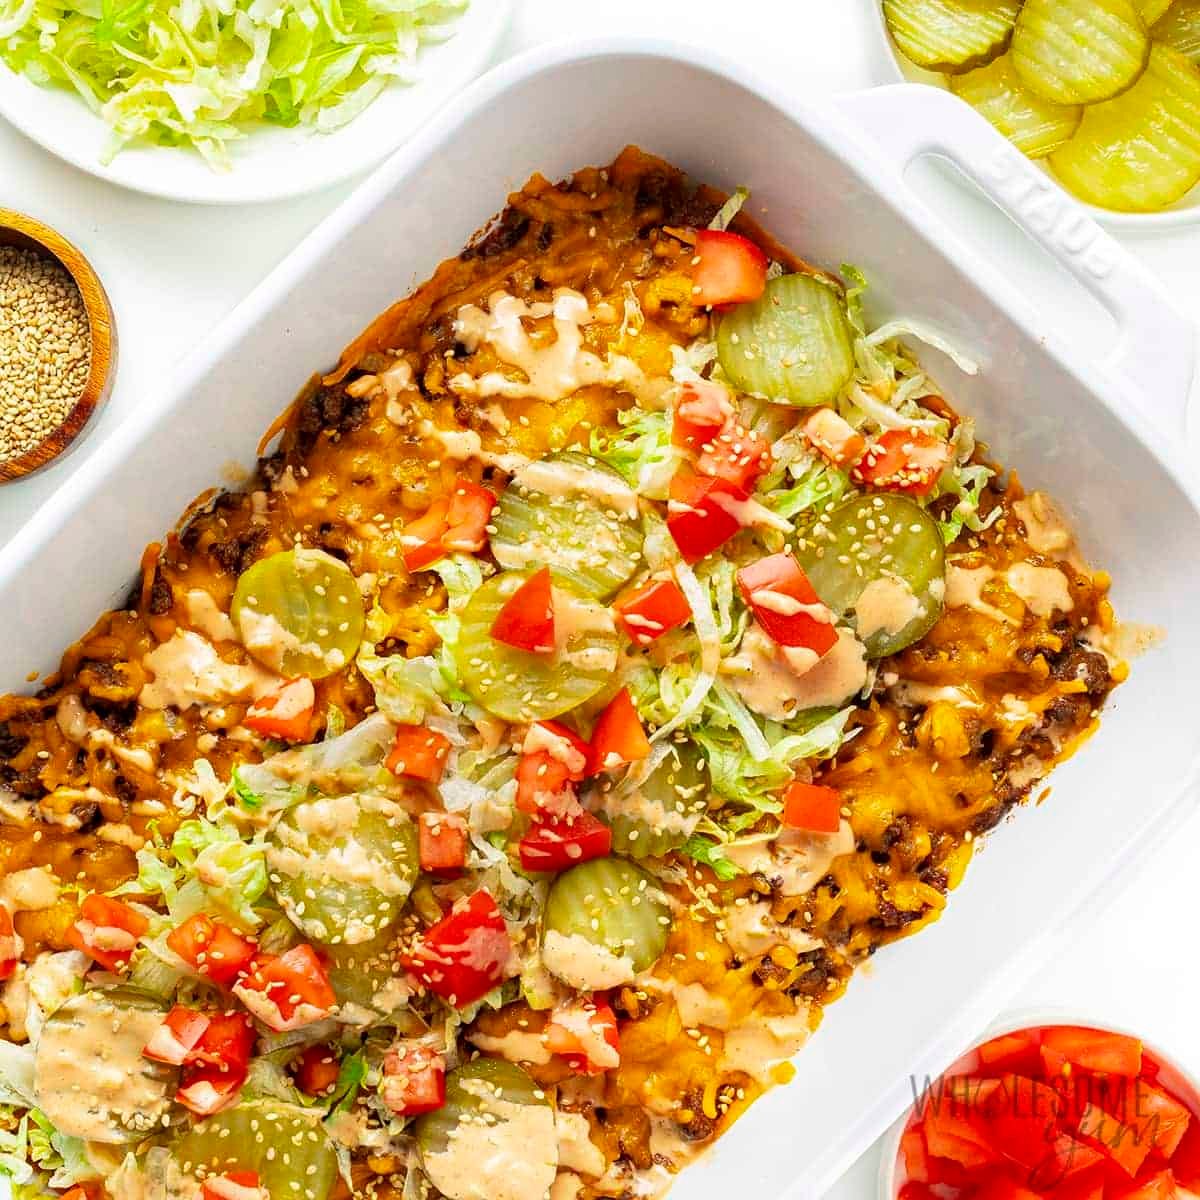 Big Mac Casserole Healthier Options, Cheesy Twists, and More!